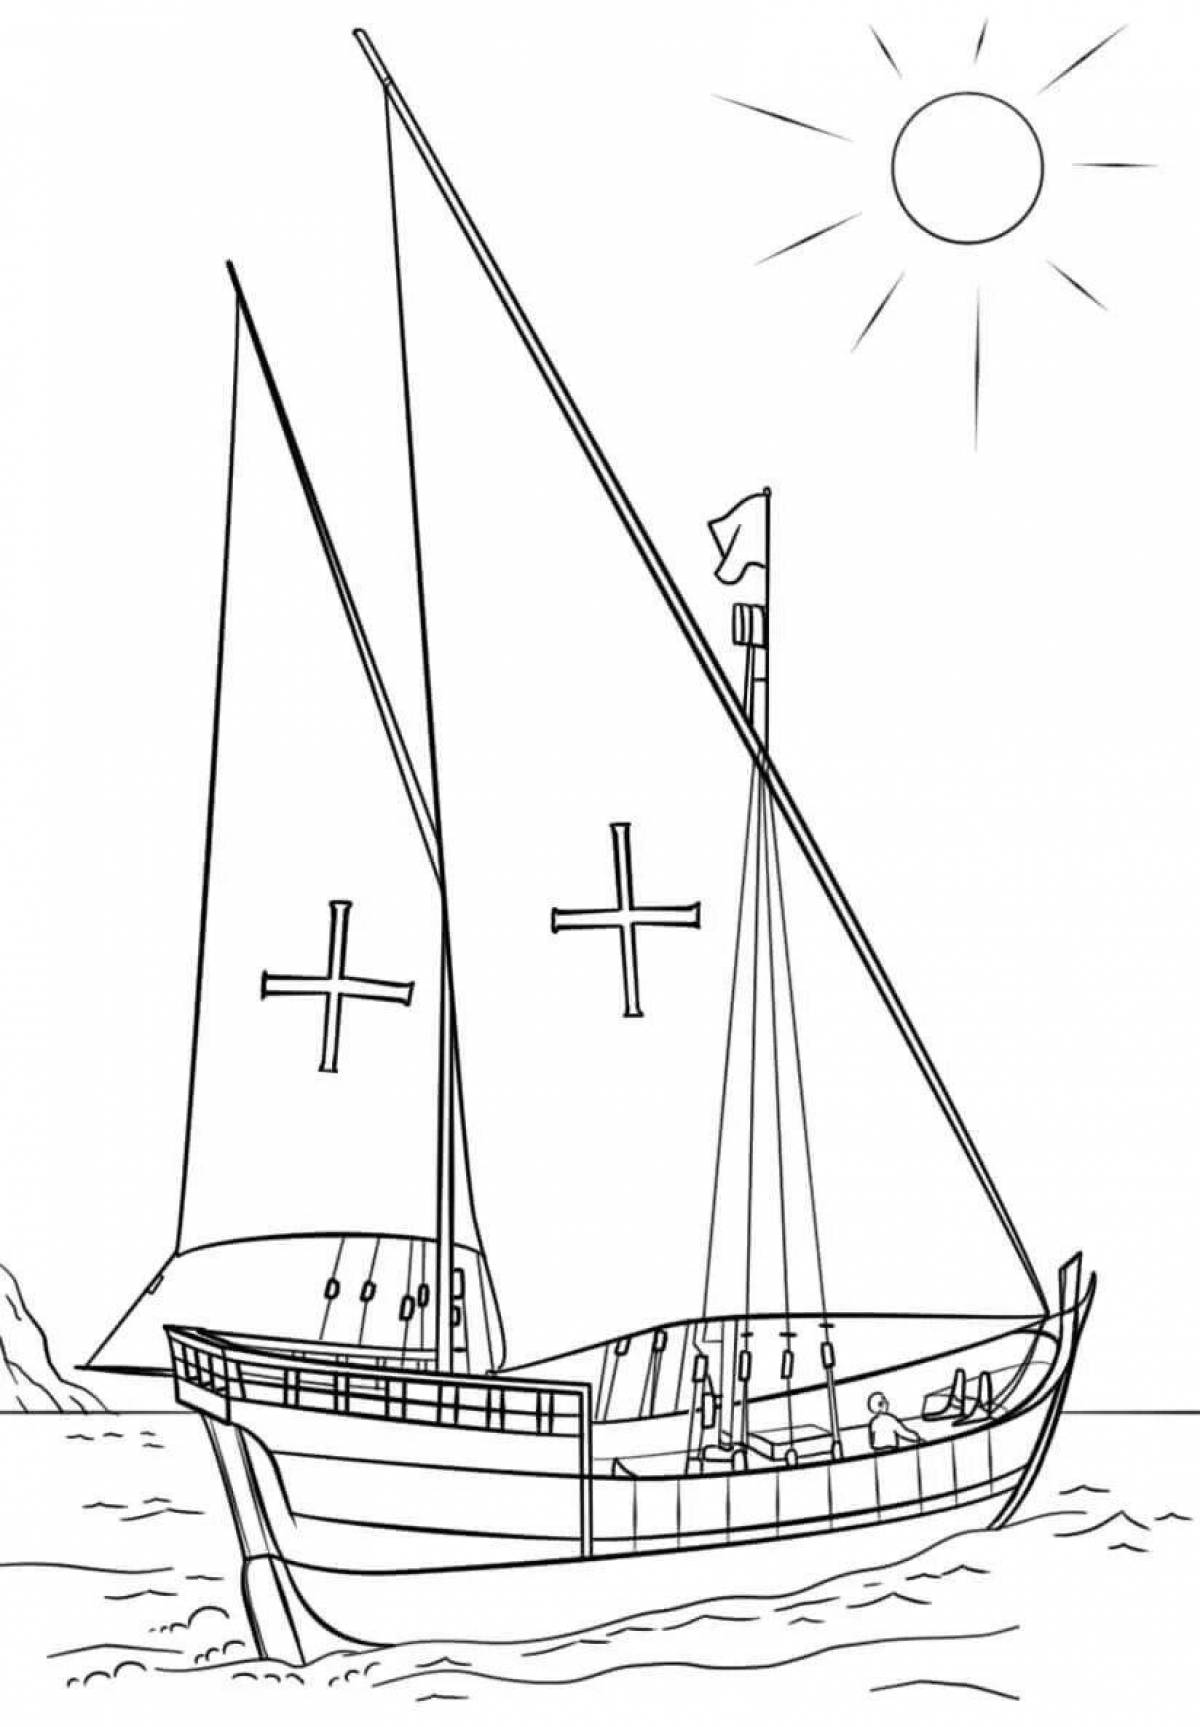 Fabulous Portugal coloring page